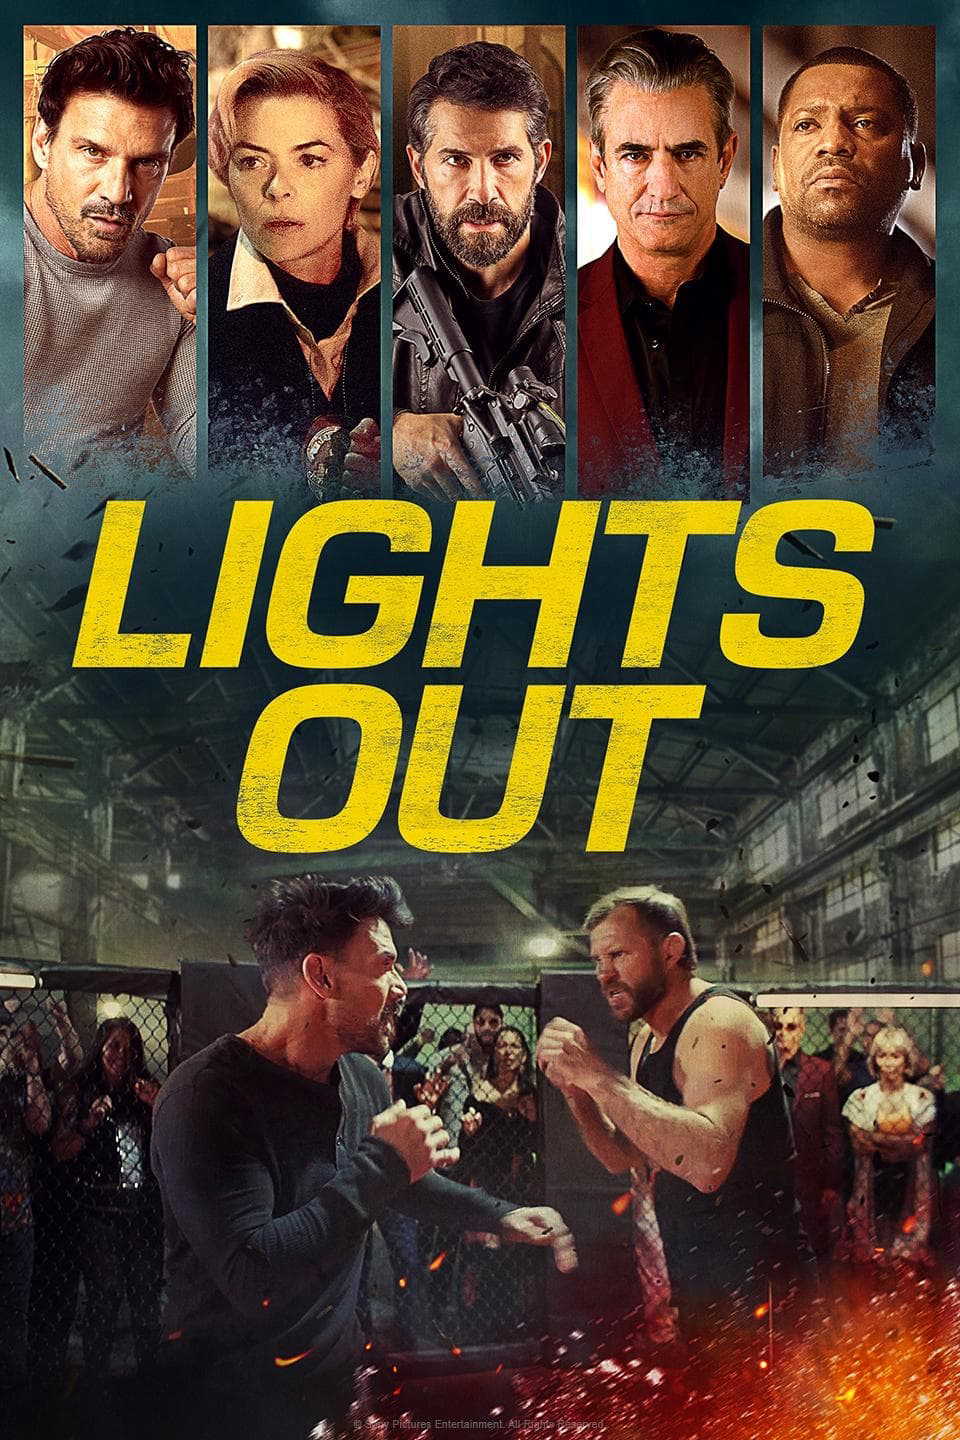 Lights Out - Lights Out